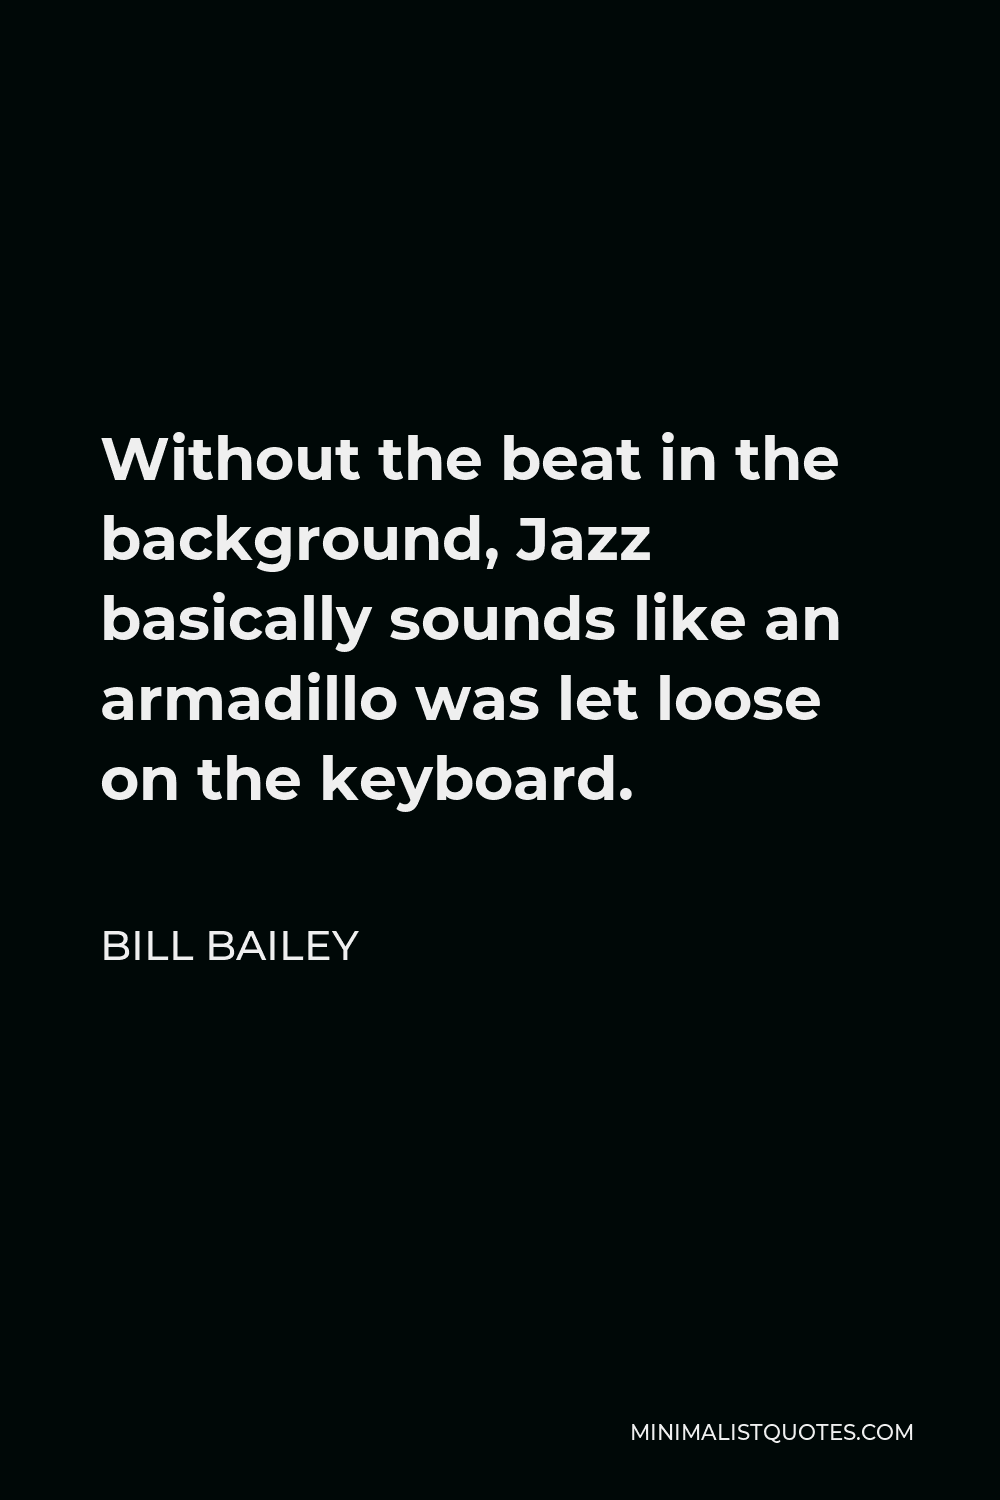 Bill Bailey Quote - Without the beat in the background, Jazz basically sounds like an armadillo was let loose on the keyboard.